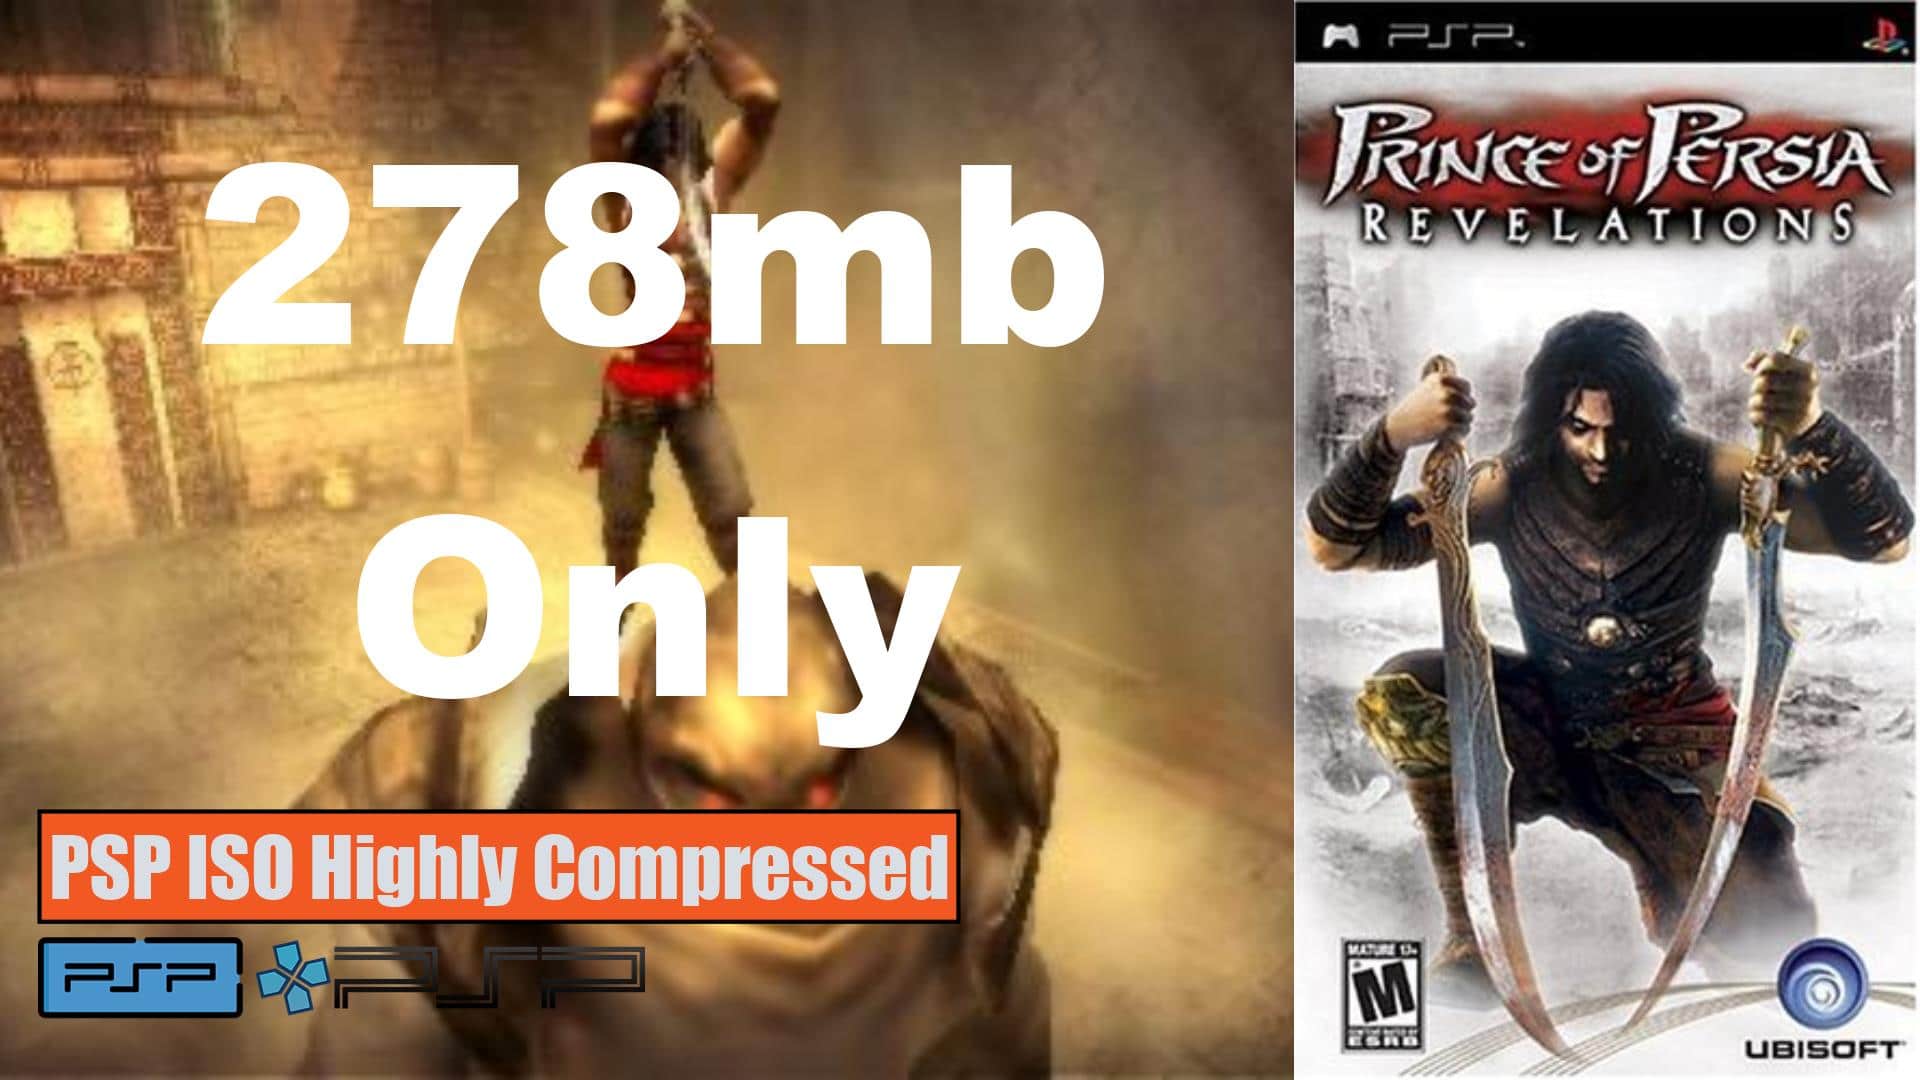 prince of persia psp highly compressed download